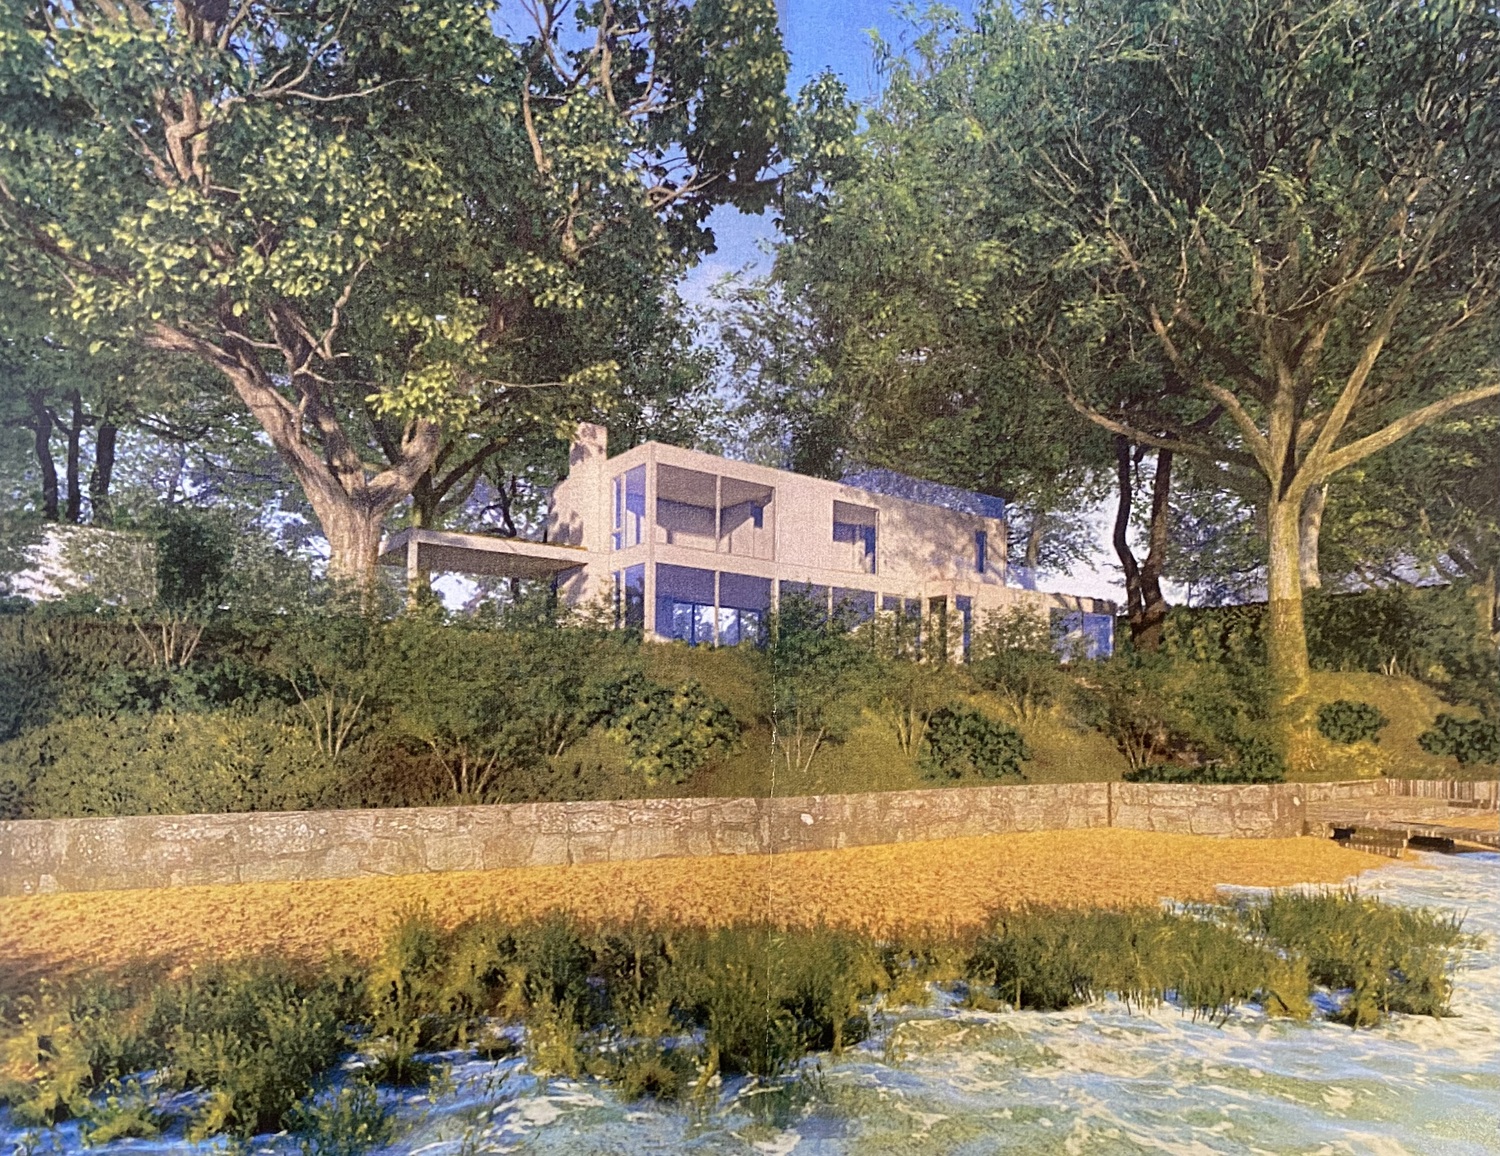 Rendering of proposed LaGuardia house at 9 Bluff Point Lane.